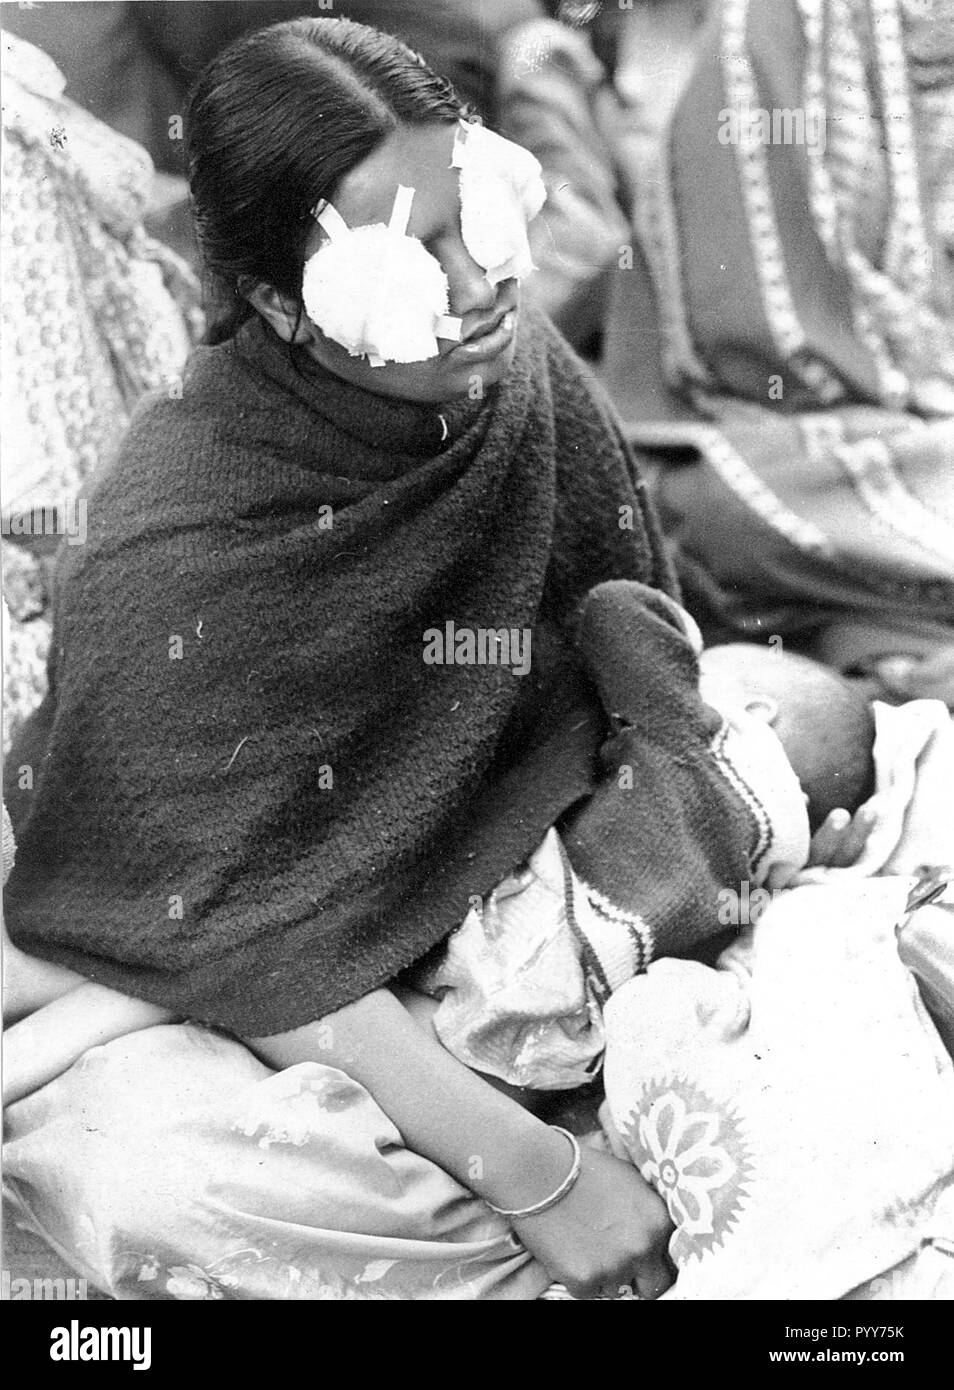 Woman eyes bandaged, Union Carbide gas leak tragedy, Bhopal, Madhya Pradesh, India, Asia, Bhopal disaster, Bhopal gas tragedy, 1984, old vintage 1900s picture Stock Photo